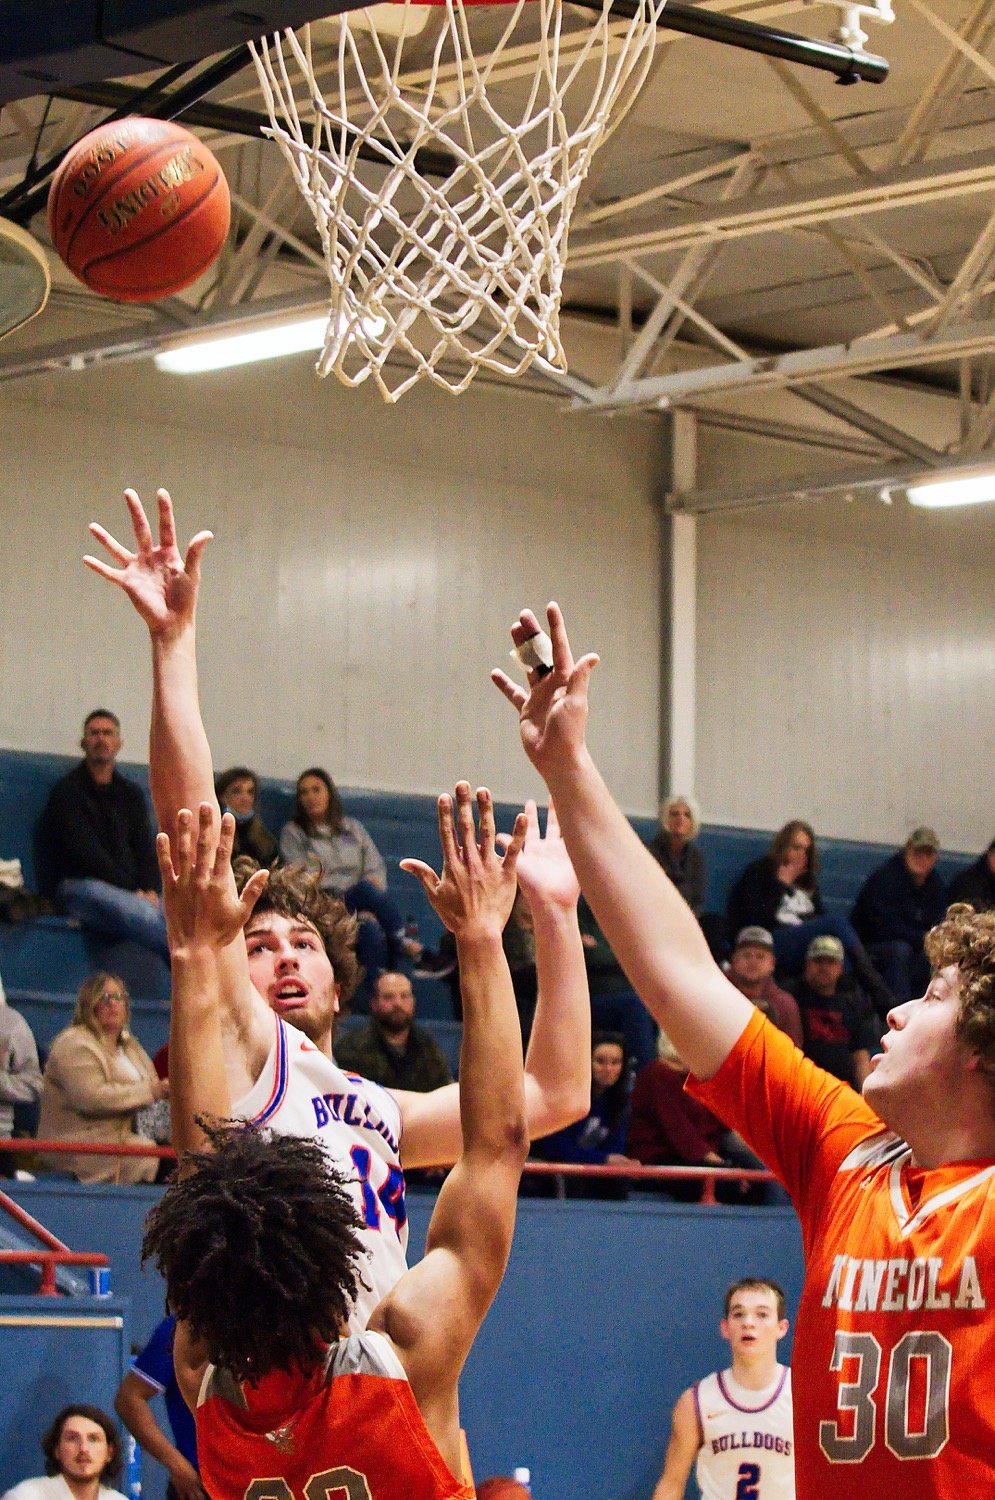 Aiden Corrier puts up a contested jumper in his final basketball game as a Bulldog. [more shots, score prints]